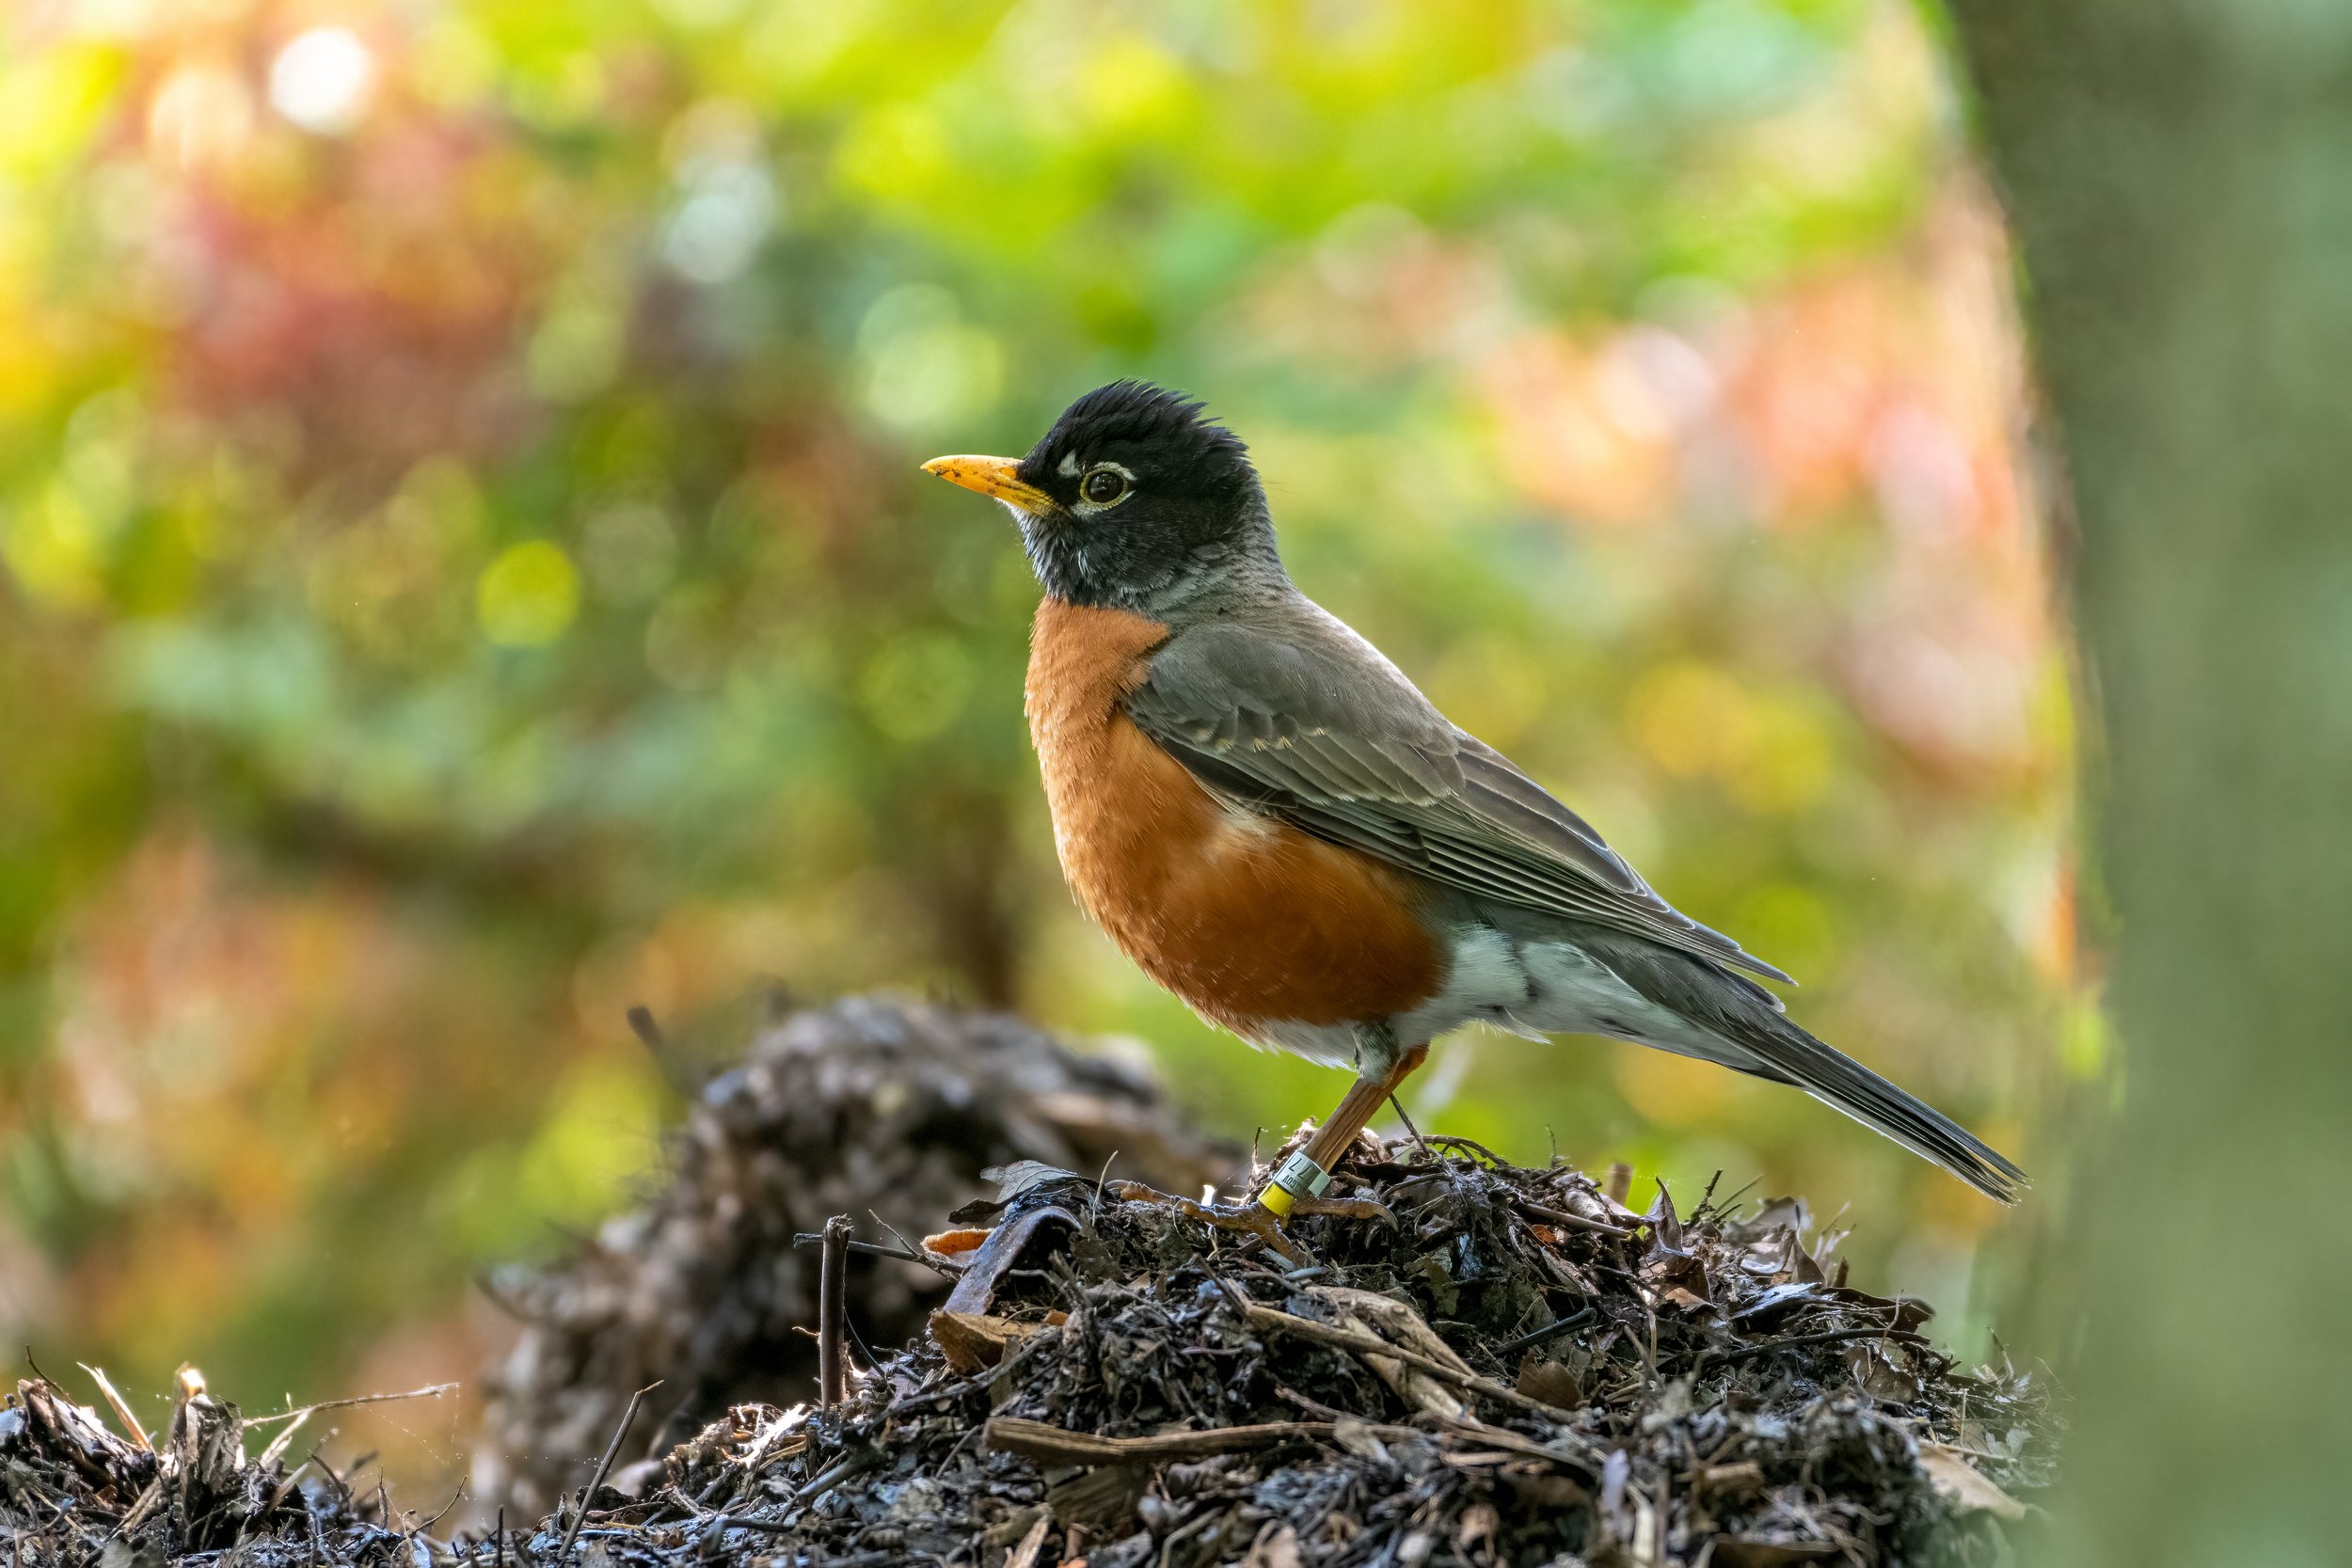  “One of my birding photos of an American robin.  I mentioned in my story helping a friend out with their bird research, and that was Emily Williams who is also a Story Collider storyteller in the DC area.  I ended up taking a partial sabbatical from